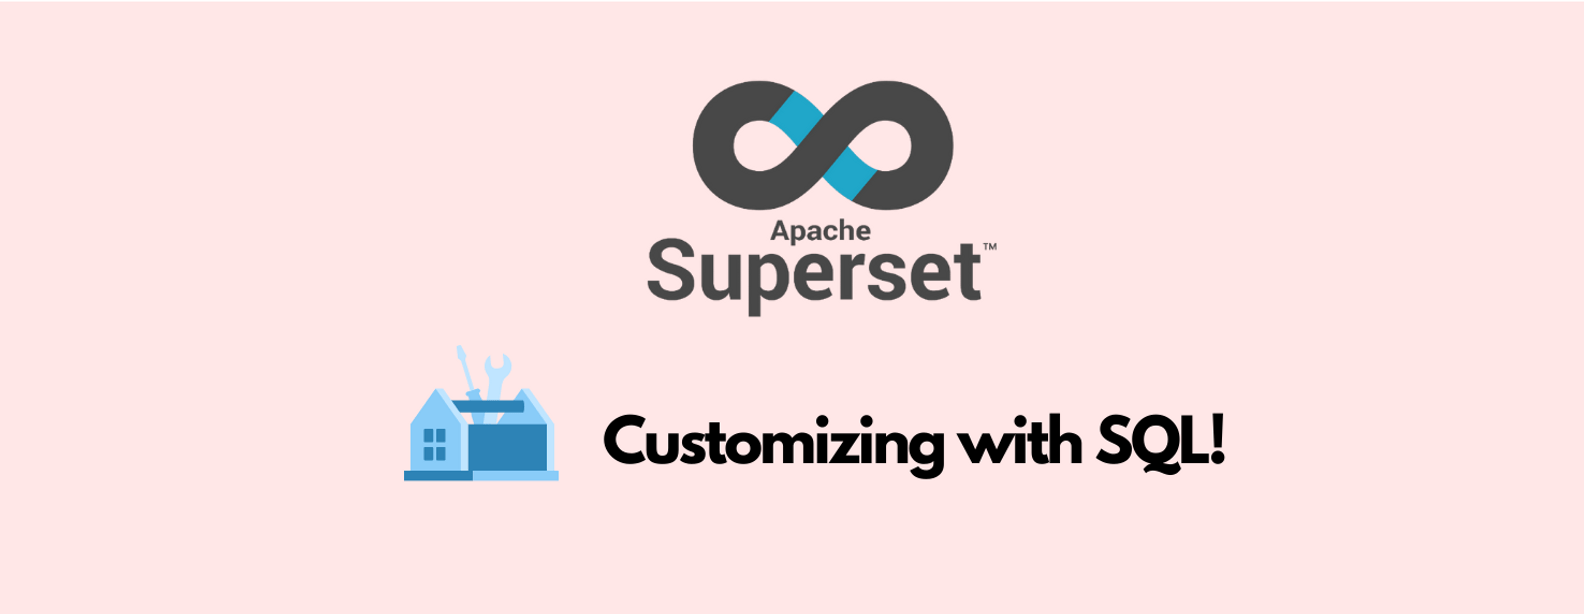 Apache Superset - How to Add a Custom Row to a Table Chart with SQL - Featured image